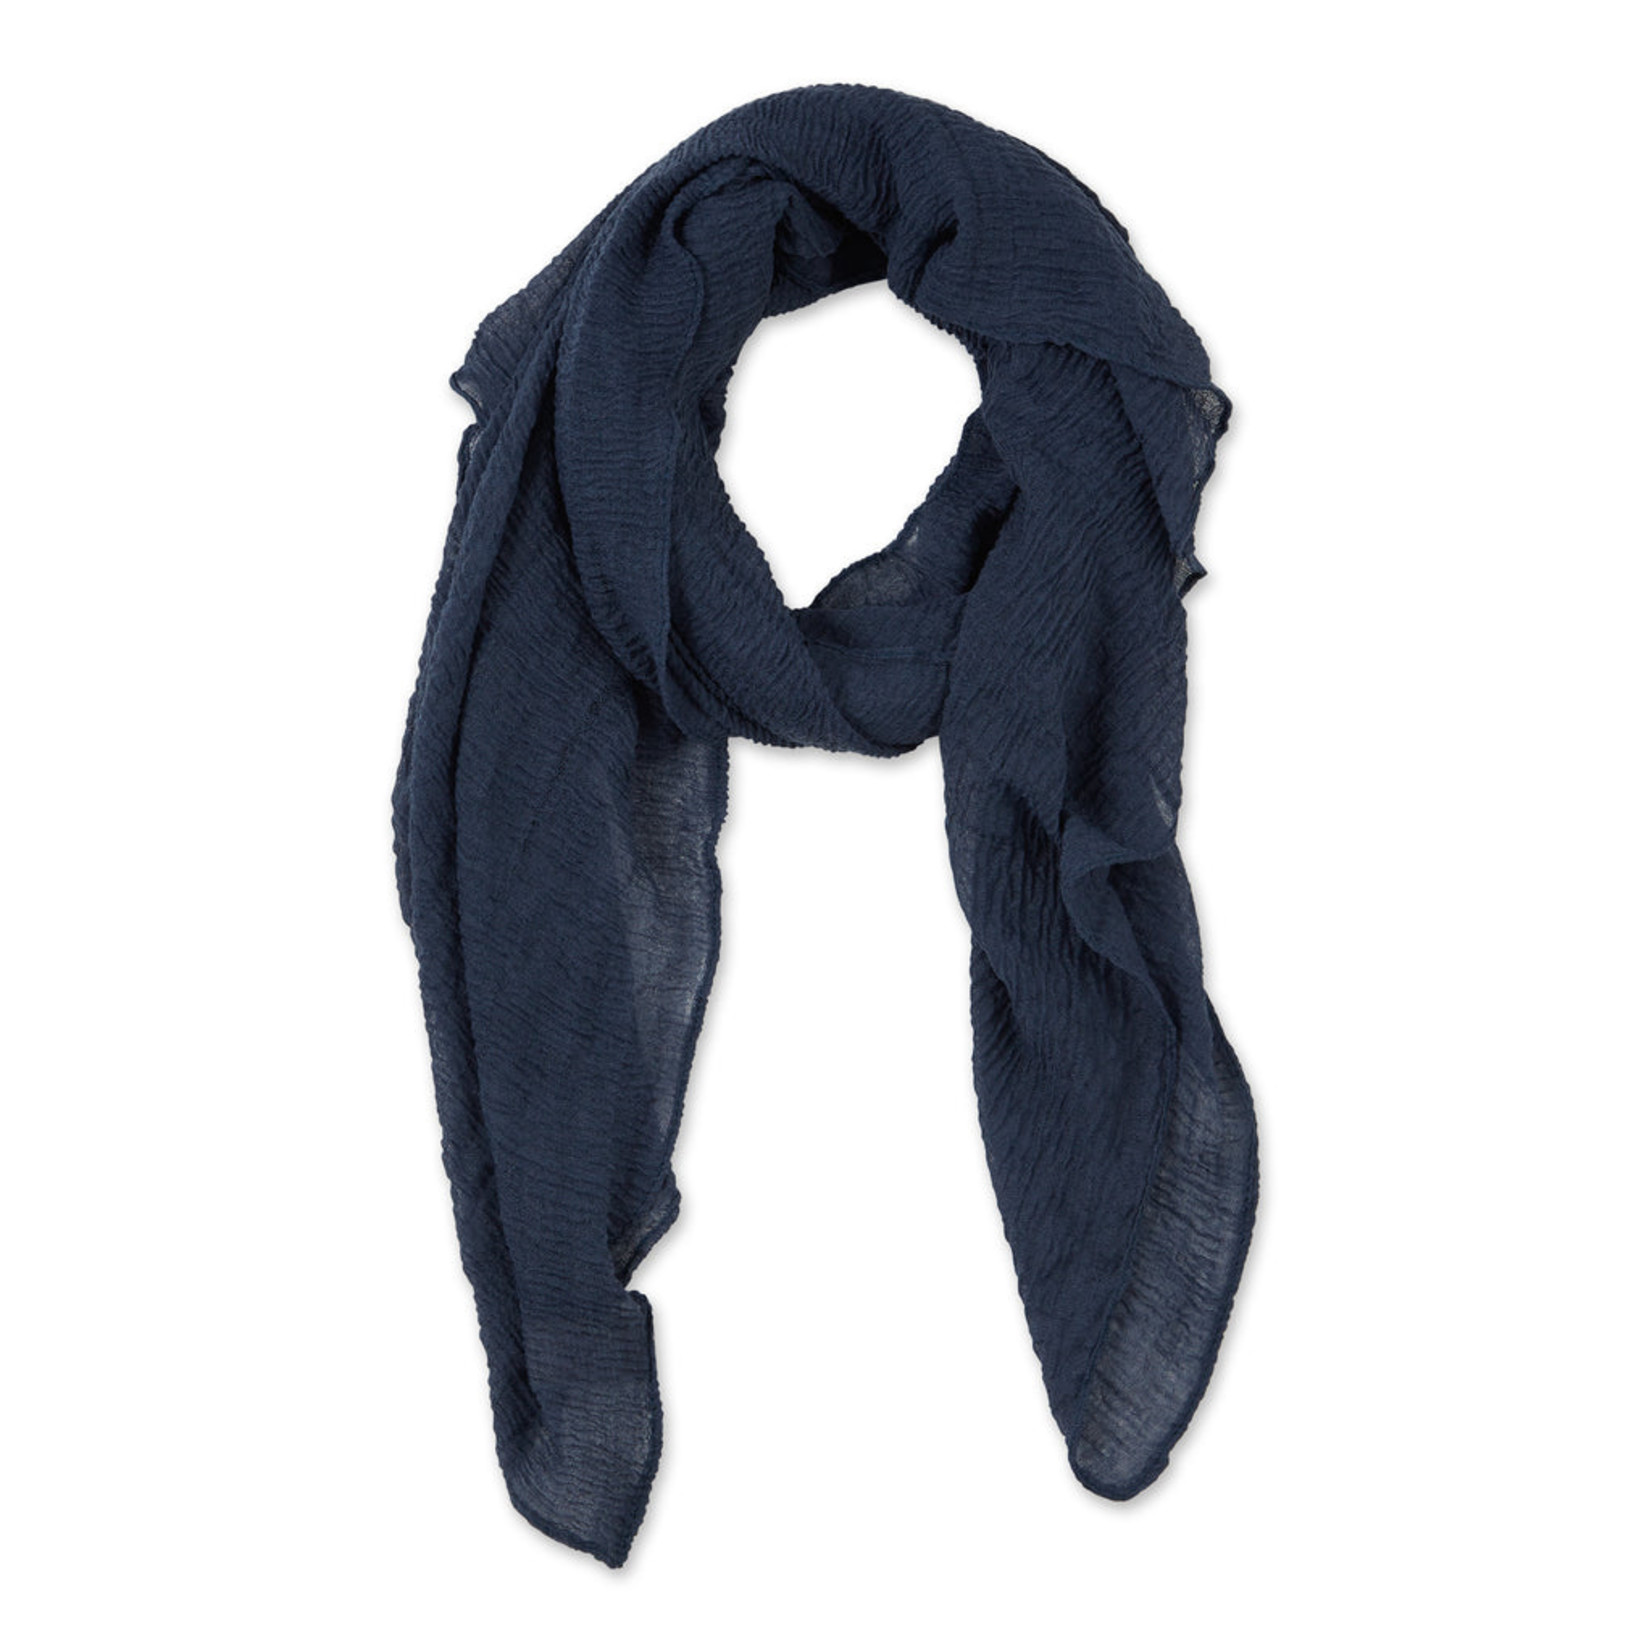 Hadley Wren - Insect Shield Scarf - Solid Navy